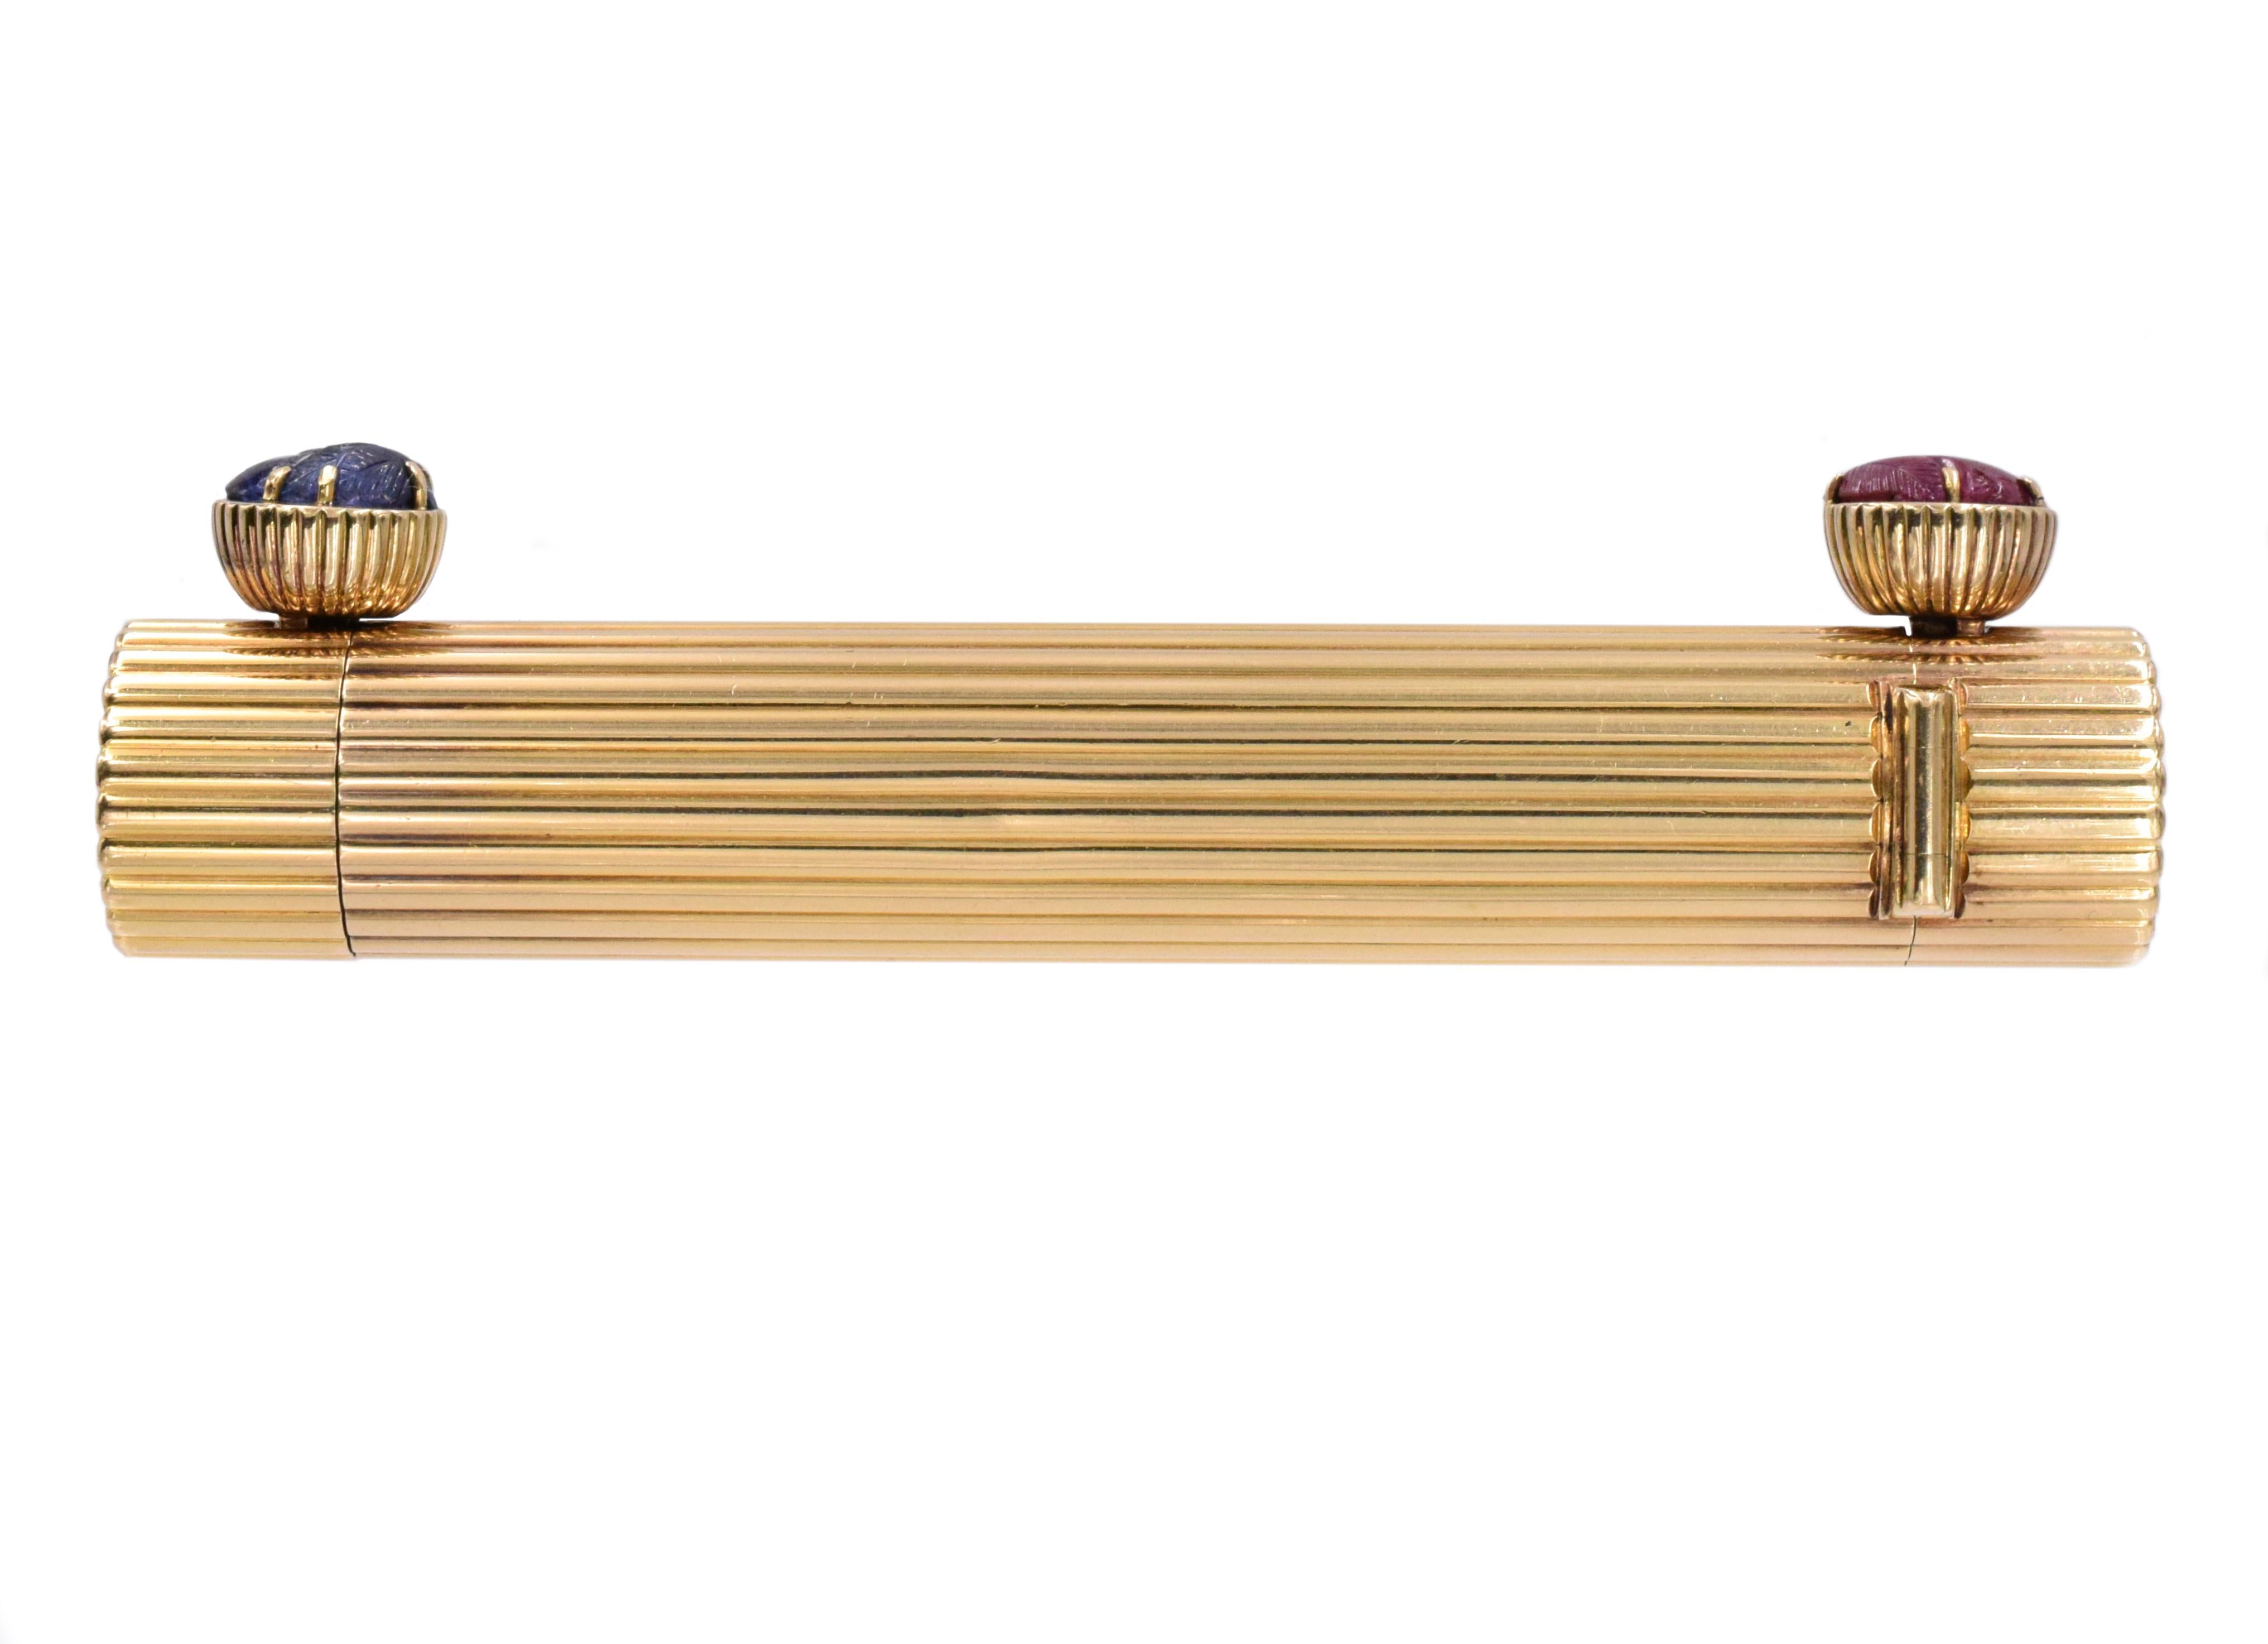 Cartier Double Headed Lipstick Holder This accessory has two heads that can hold lipstick and 2 carved gemstones (ruby and sapphire) all set in 18k yellow gold. Signed Cartier Paris, 750, maker mark and french assay marks. Measurements: 4 inches X